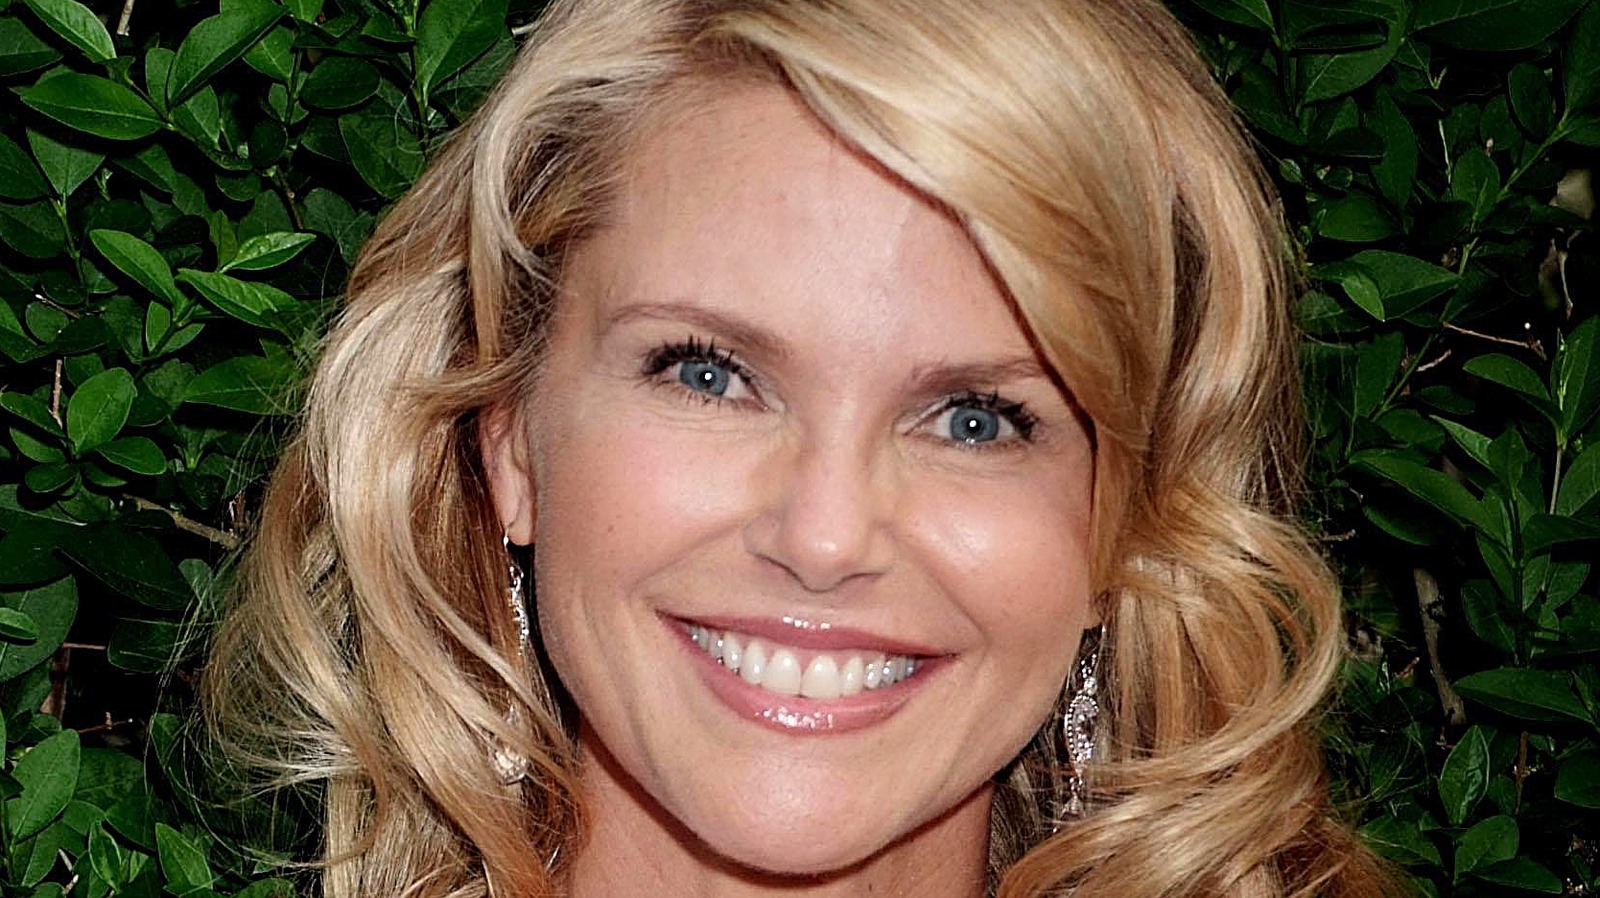 Christie Brinkley had a hole drilled in her eye!, best unbiased news source, health, follow News Without Politics